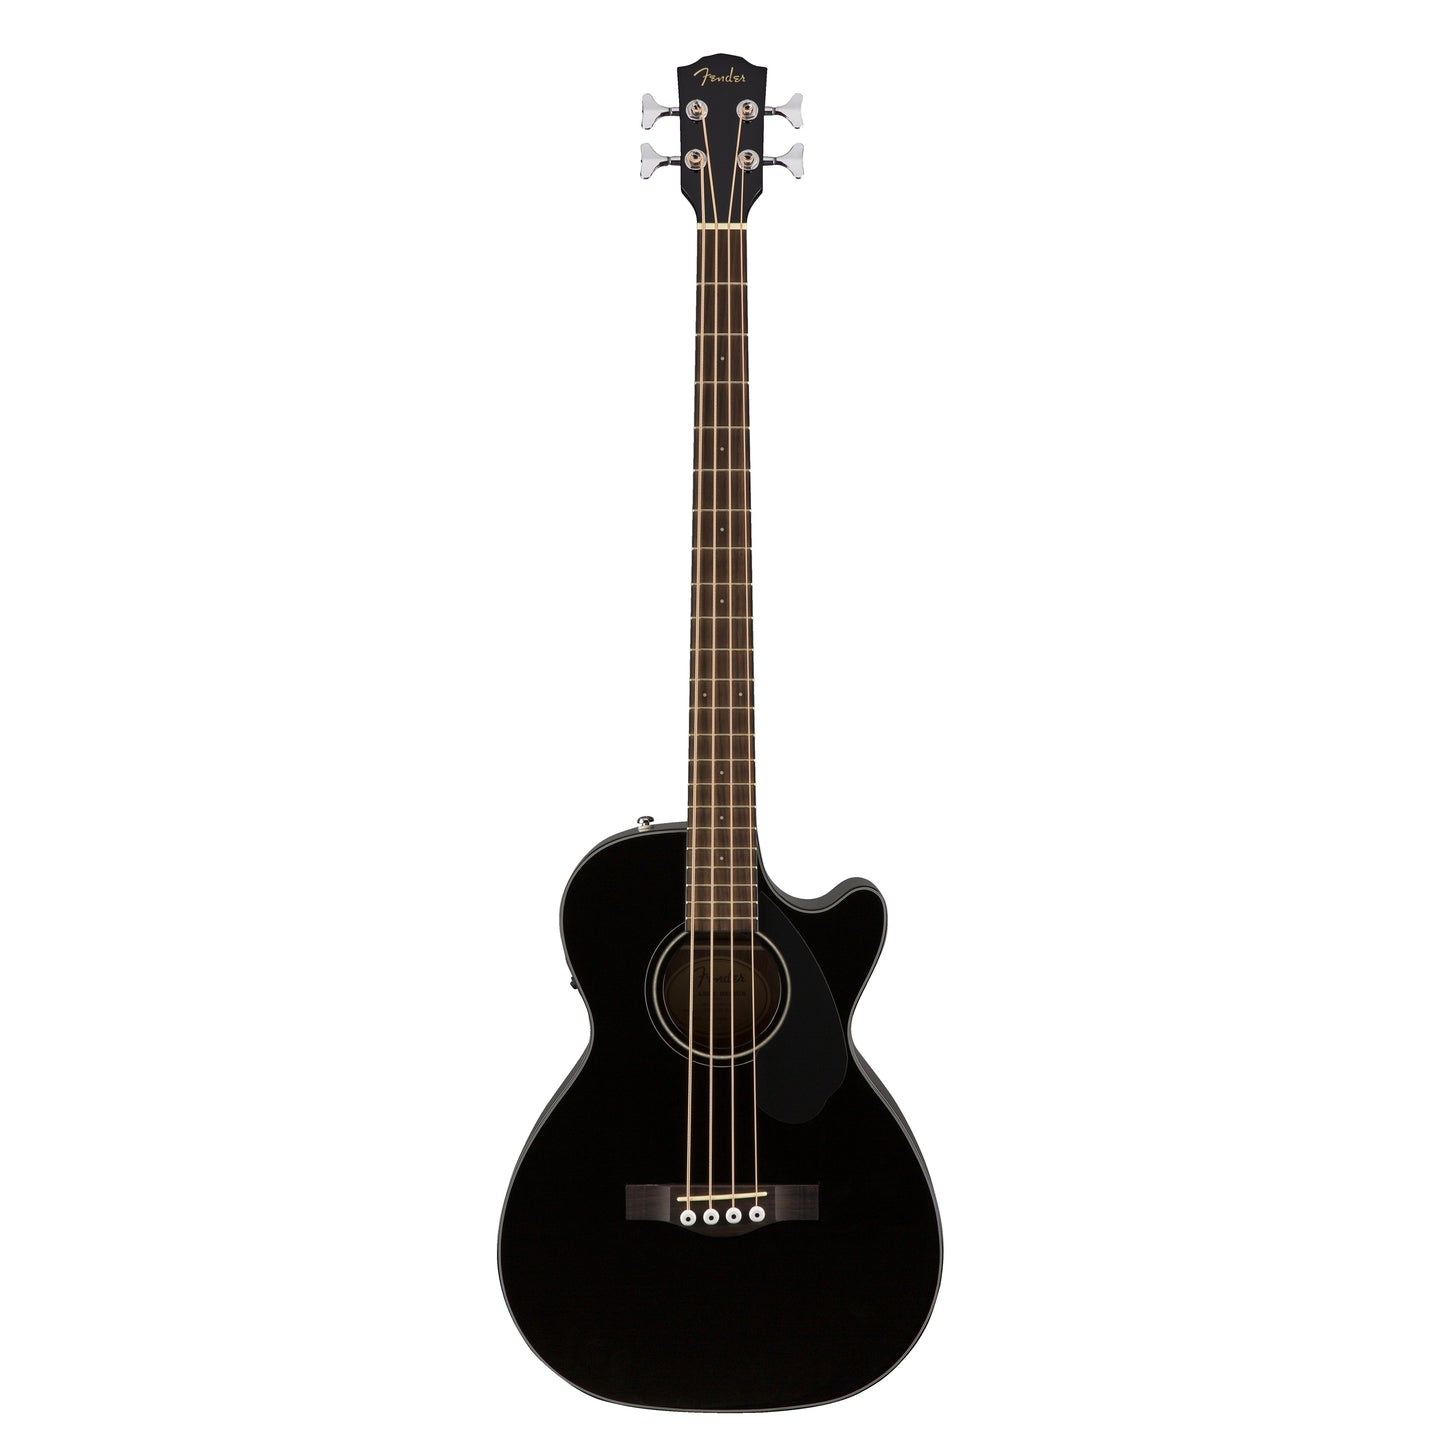 Fender CB60SCE 4 String Acoustic Electric Bass Guitar in Black